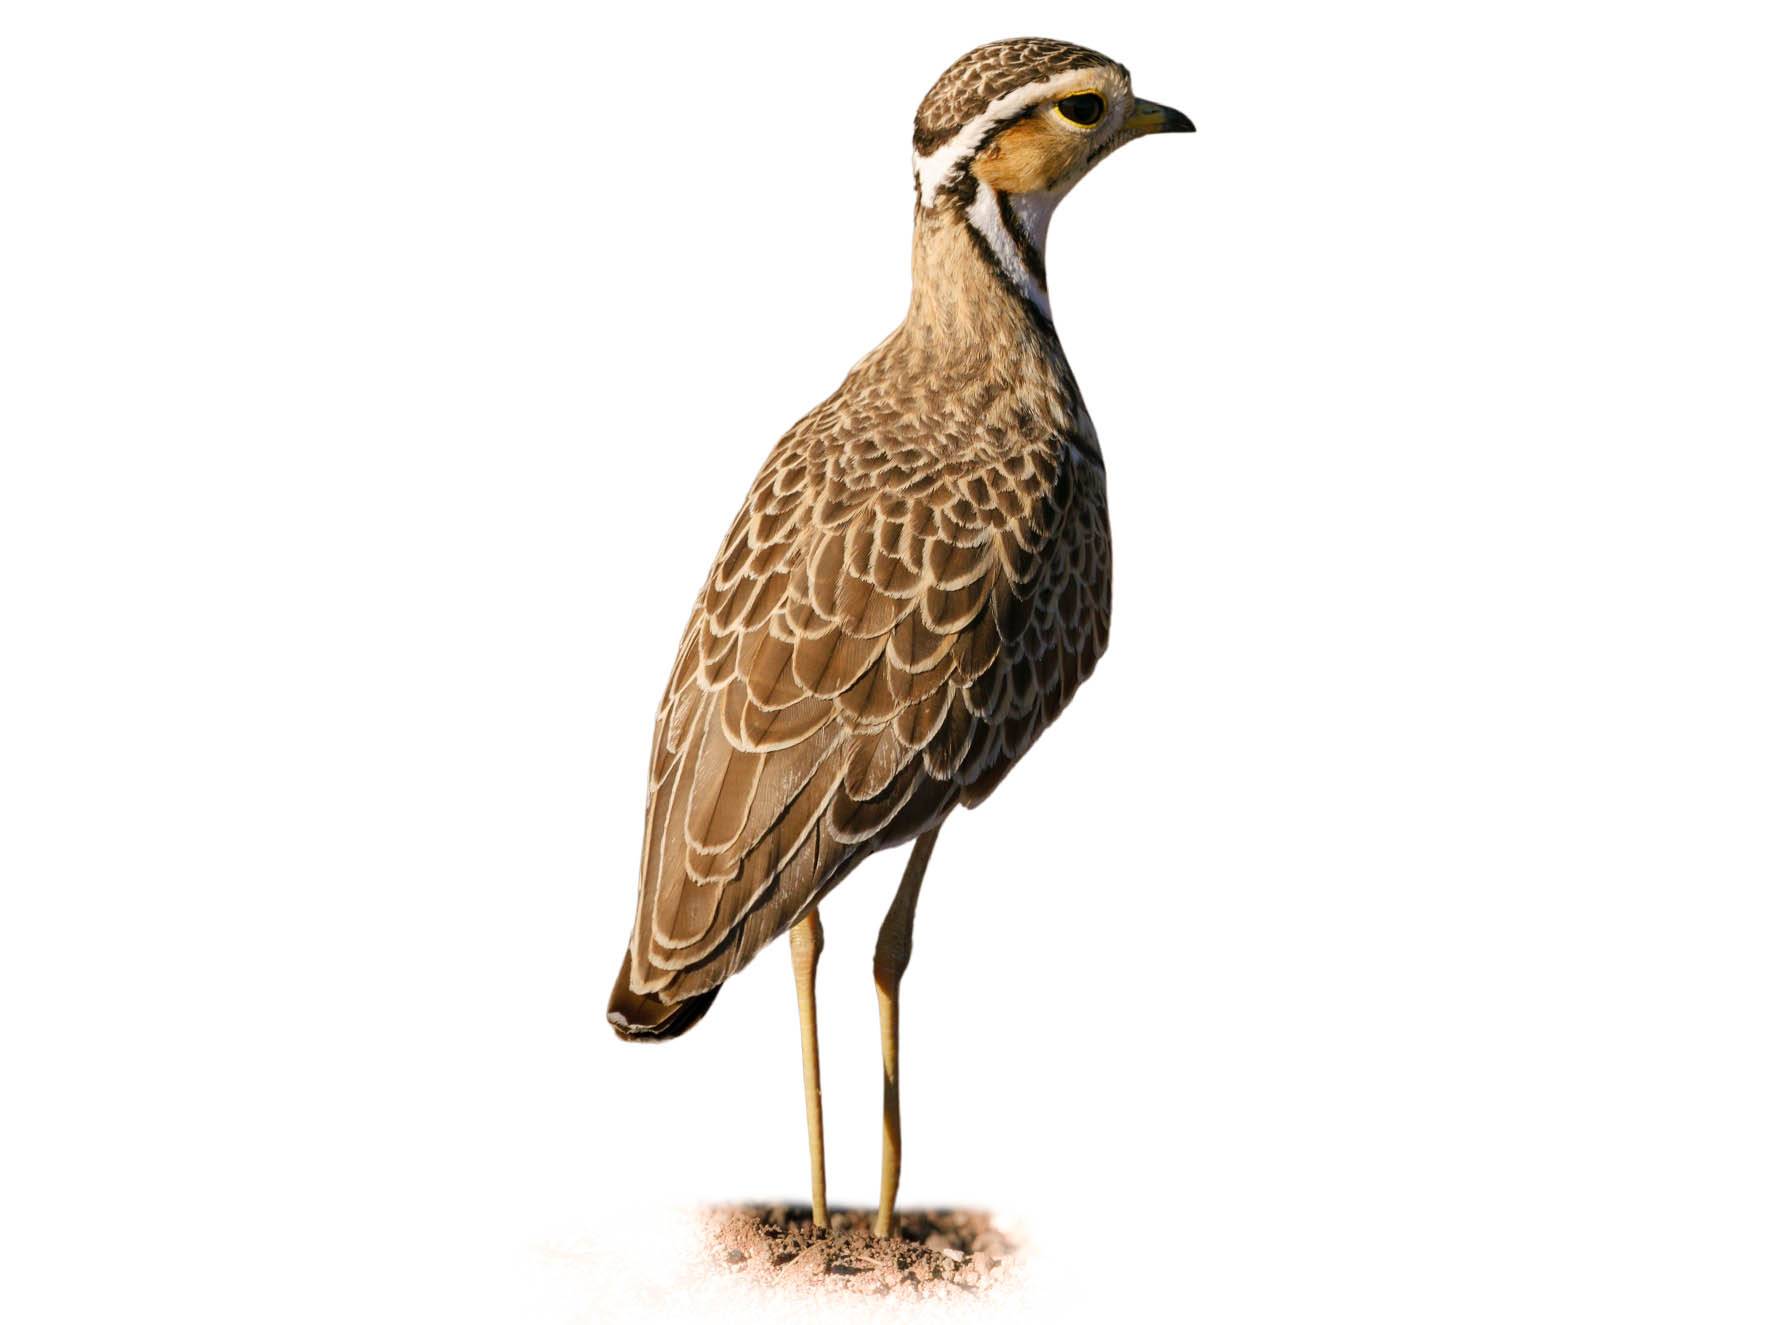 A photo of a Three-banded Courser (Rhinoptilus cinctus)